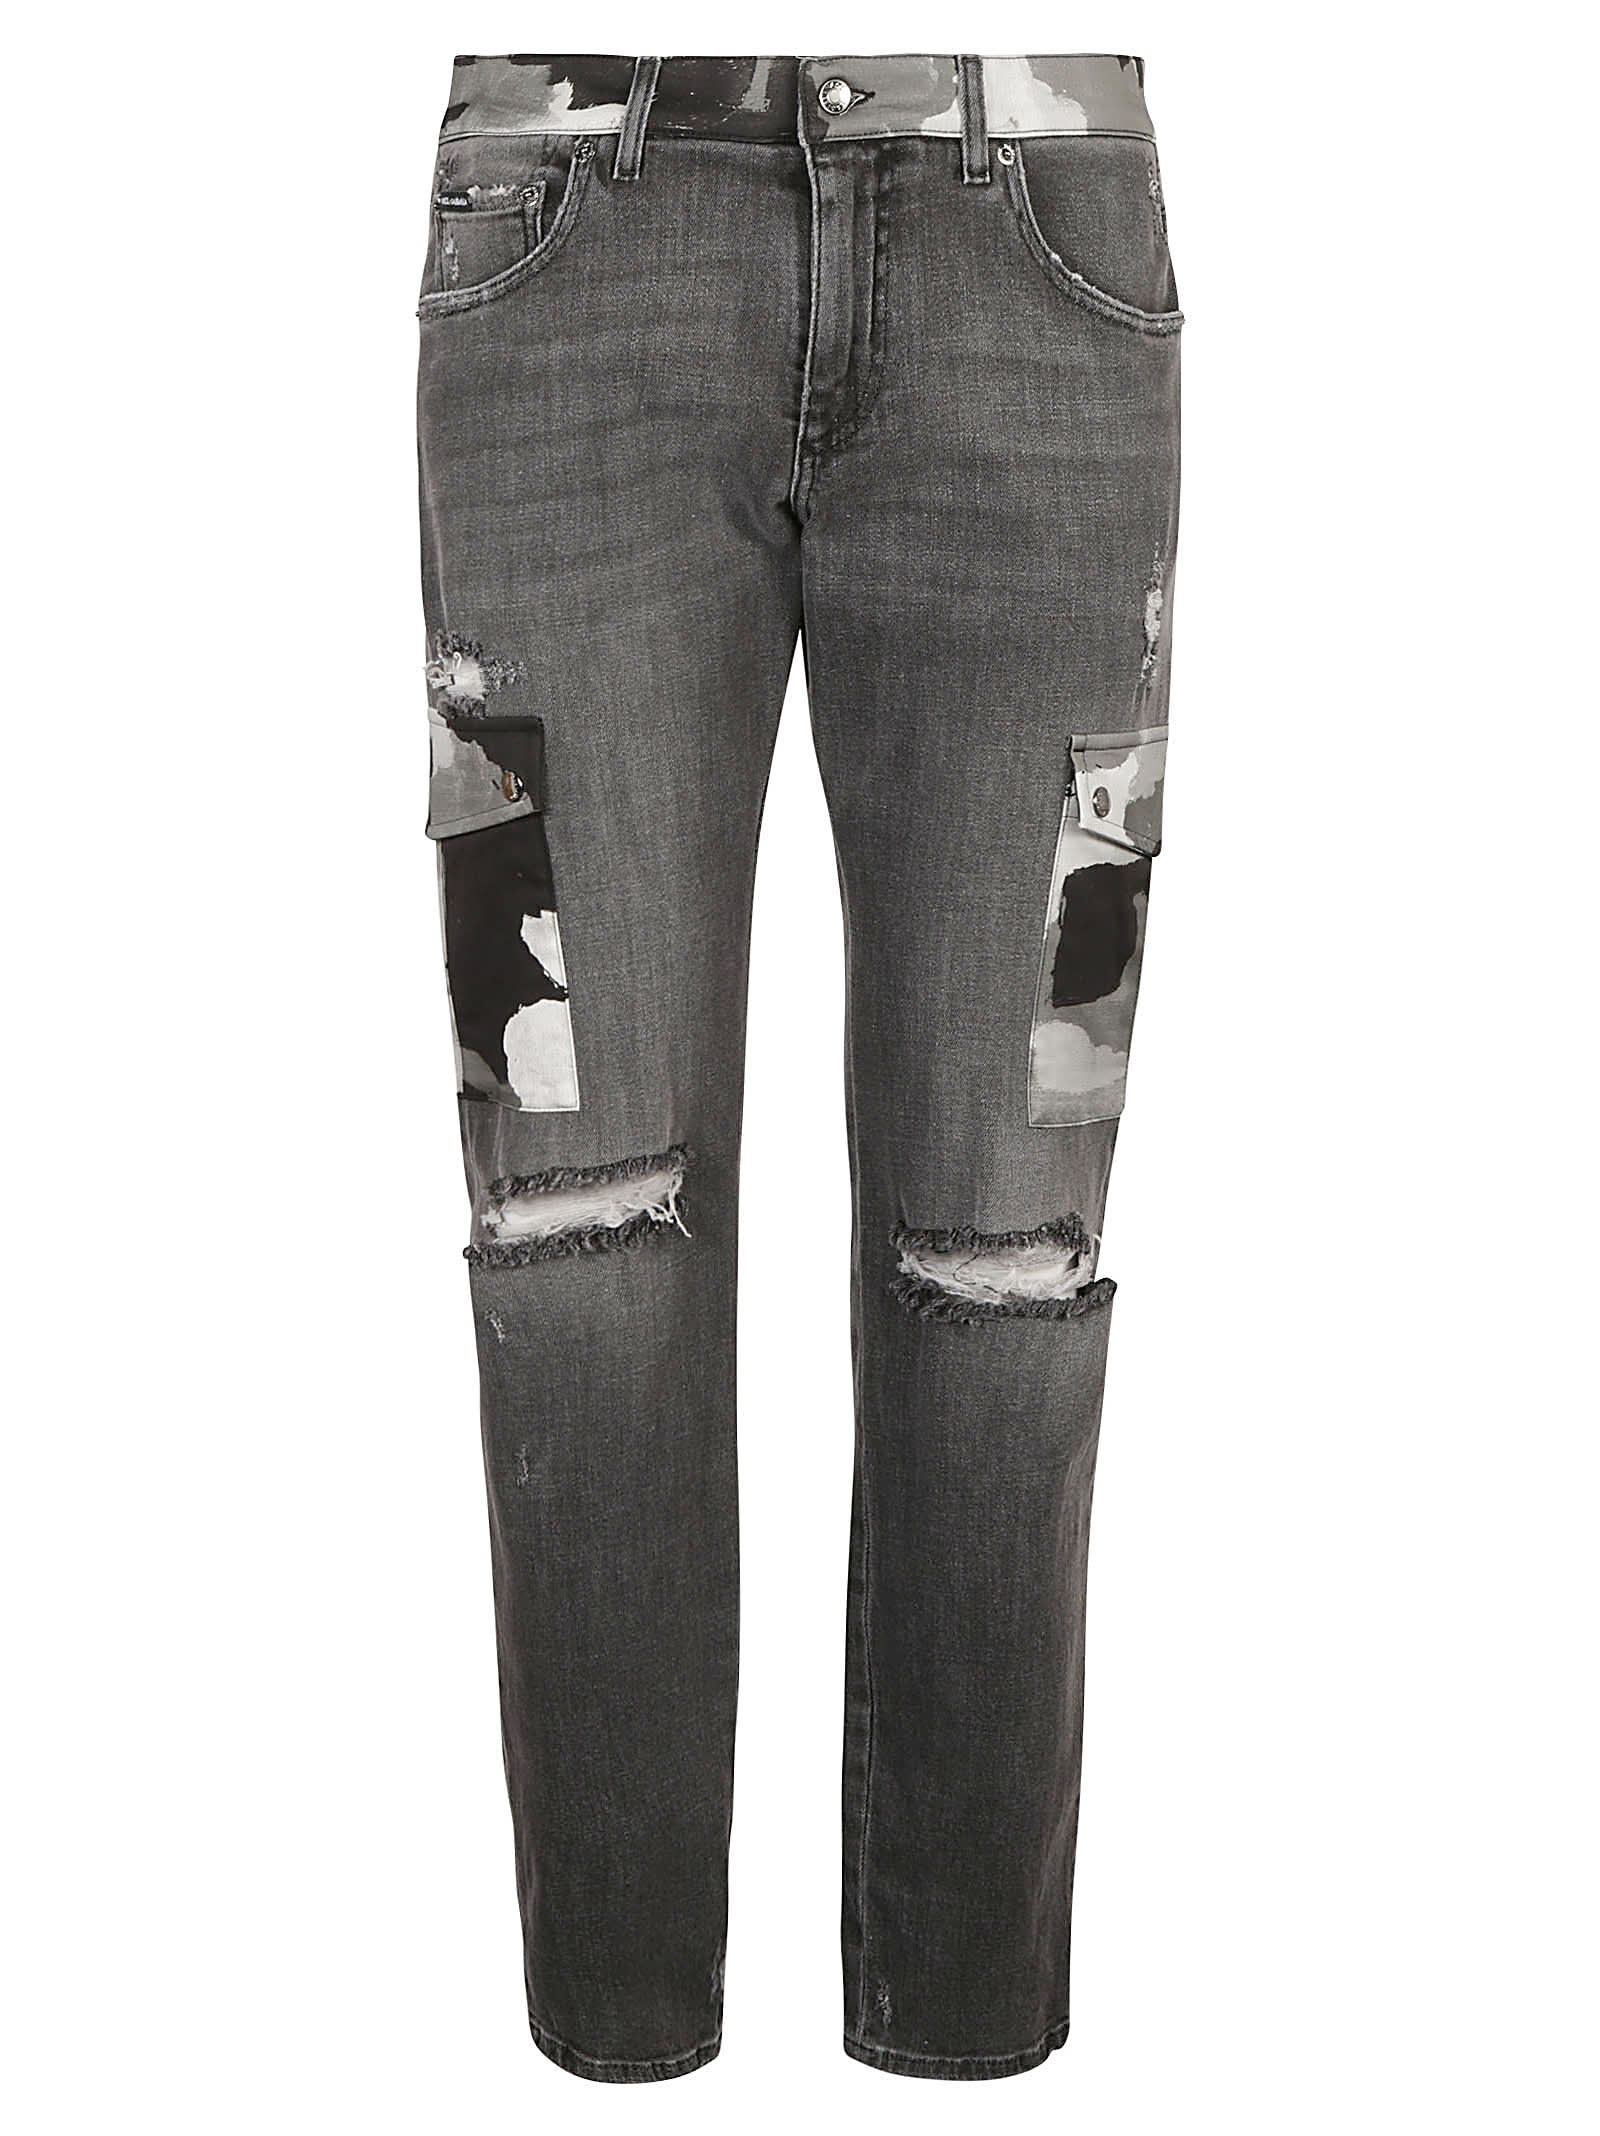 DOLCE & GABBANA SIDE BUTTONED POCKET DETAIL RIPPED JEANS,GWLFCDG8DL6 S9001 VARIANTE ABBINATA